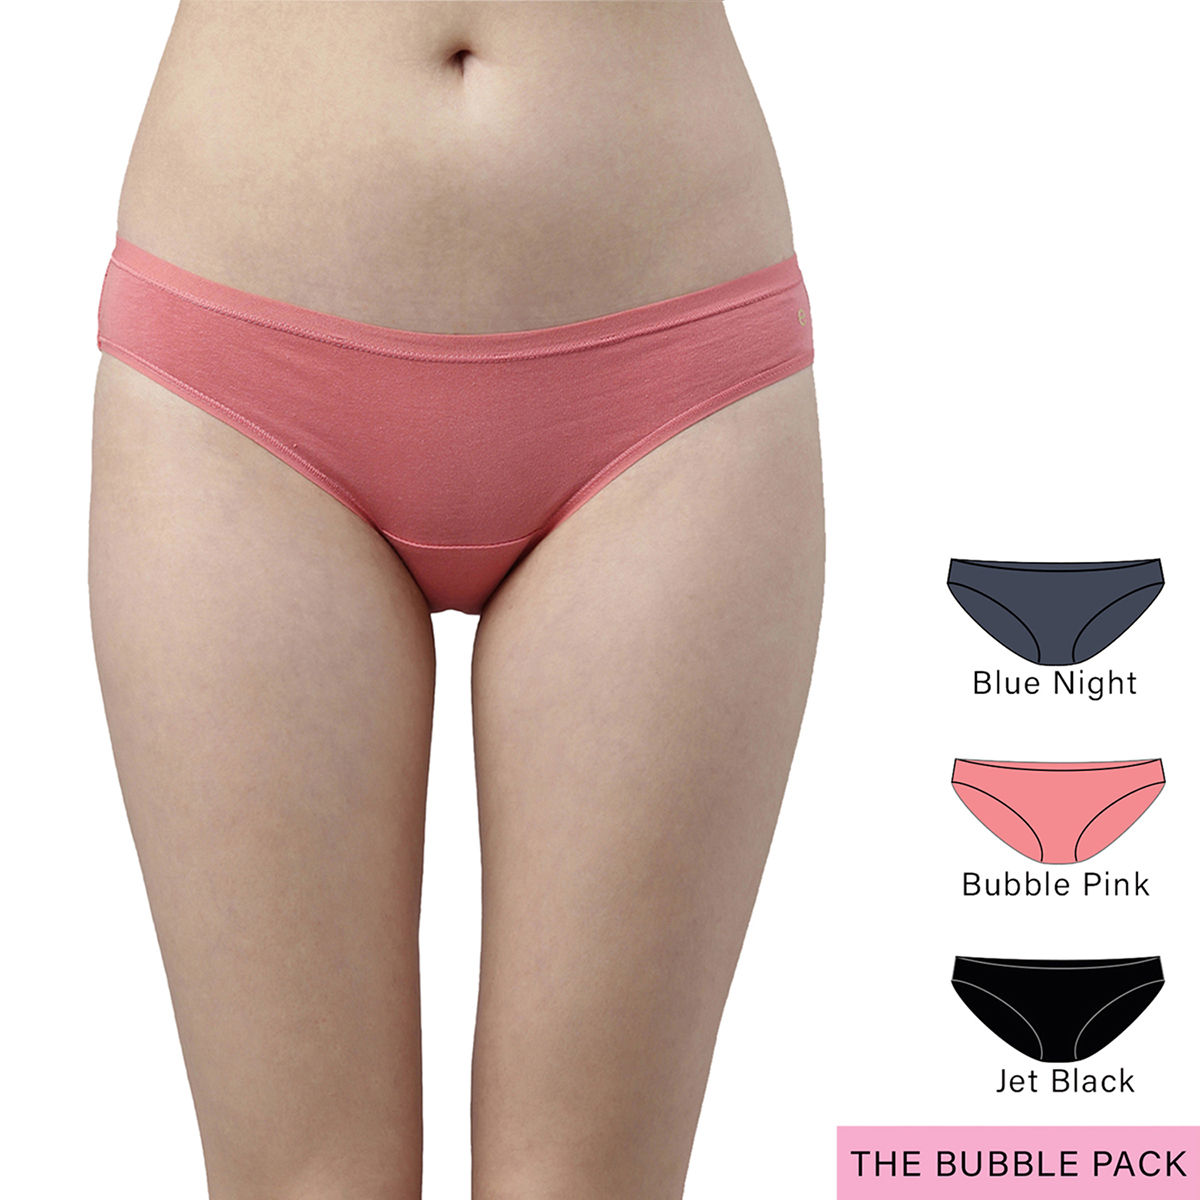 Buy Enamor CB01 Antimicrobial Full Coverage, Low Waist Cotton Bikini Panty  Pack of 3 - Multi-Color Online